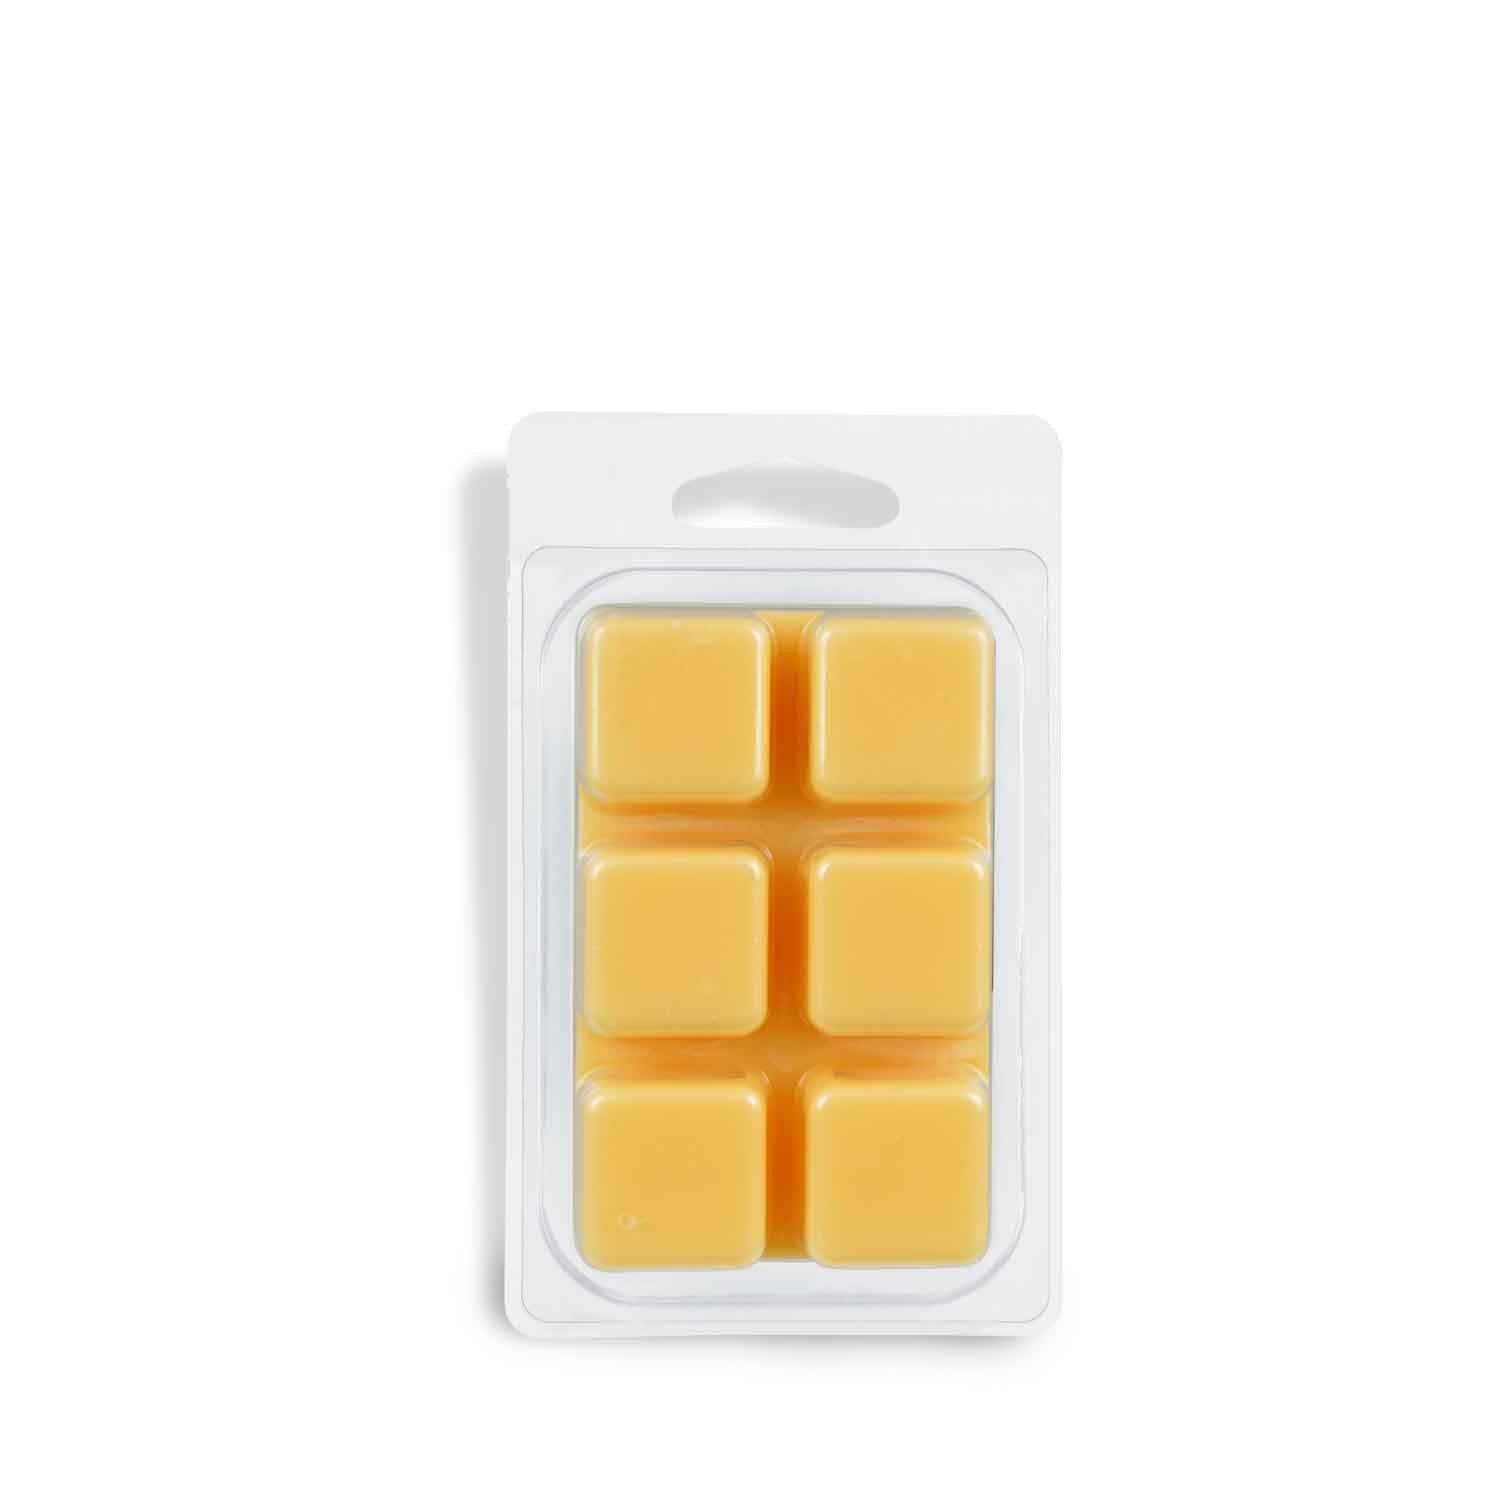 Square Cube Clamshells for Wax Melts or Tarts & Wickless Candles, Set of 50